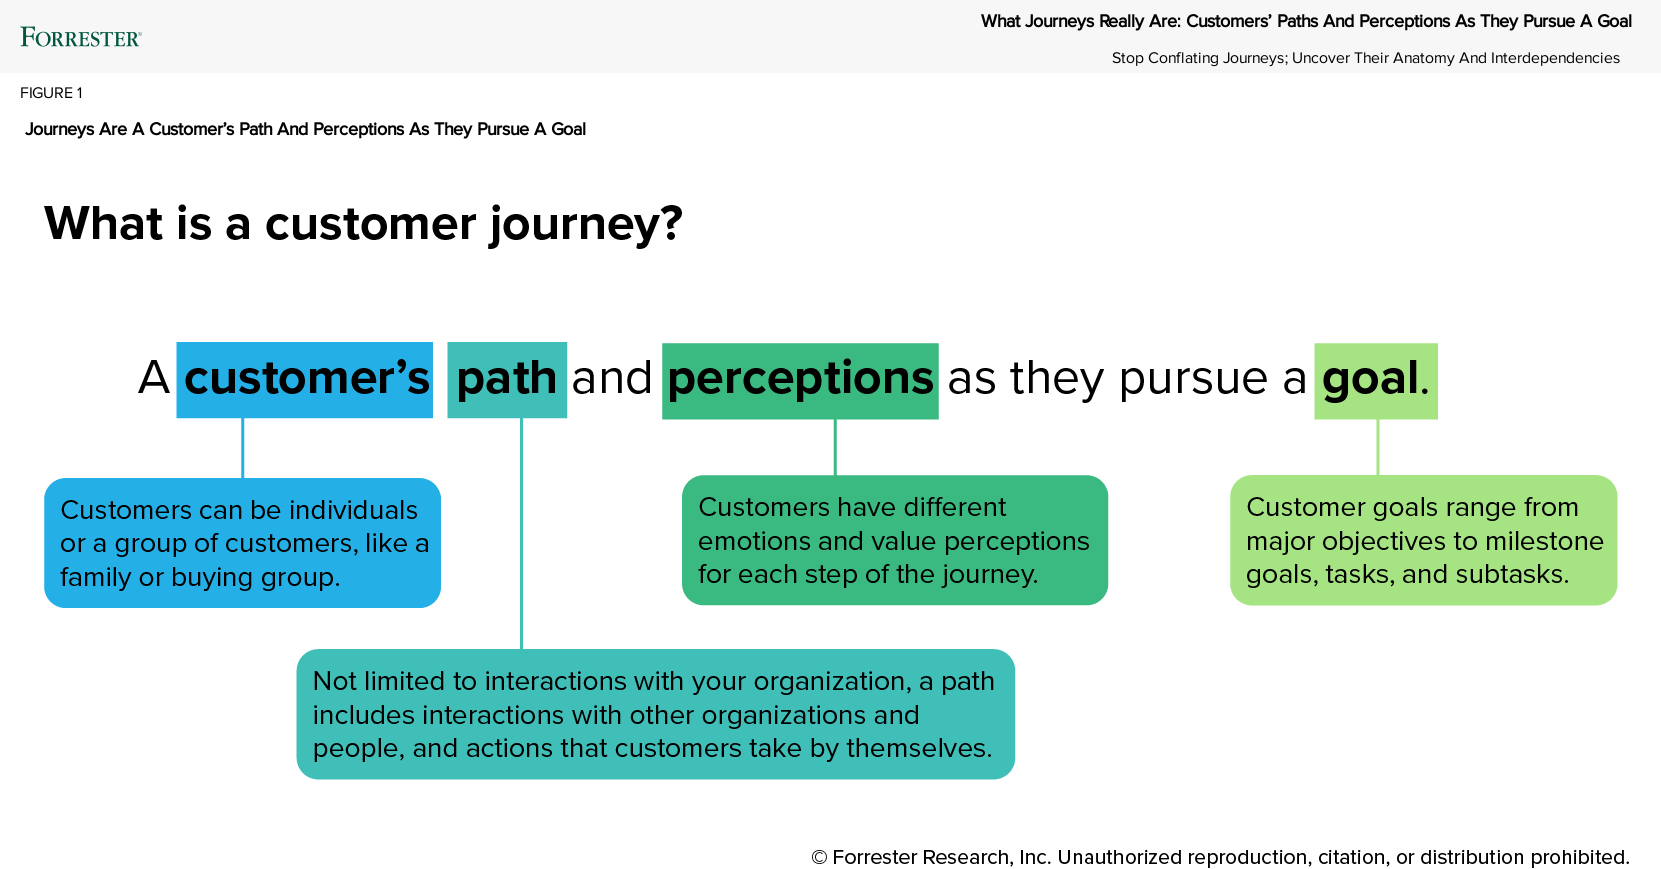 what is a customer journey: a customer's path and perceptions as they pursue a goal